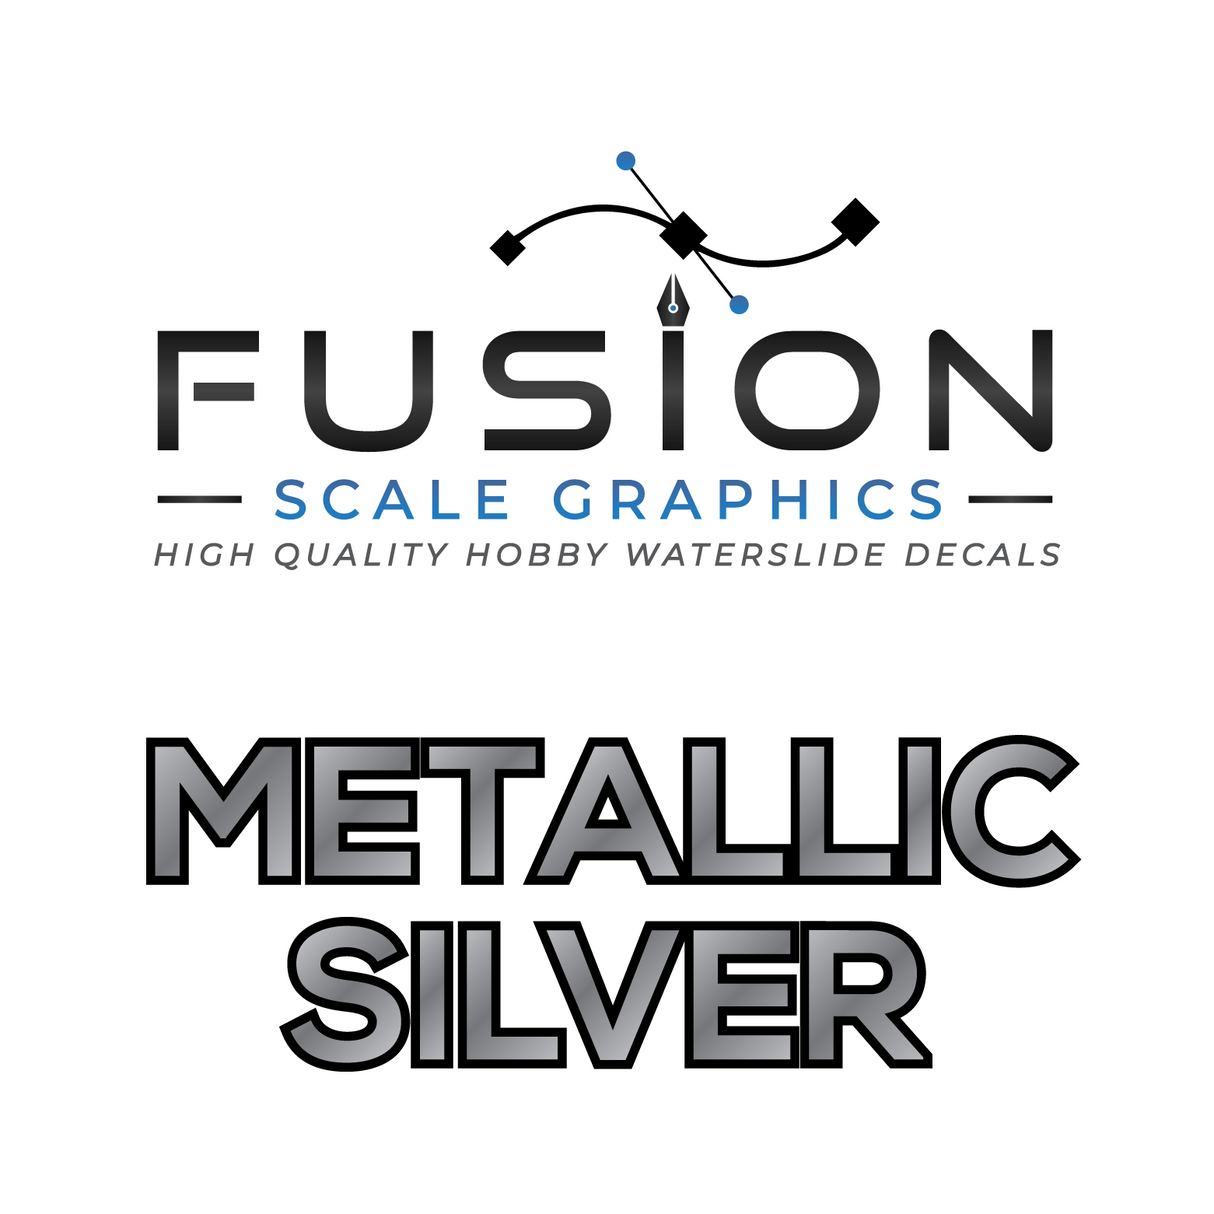 Fusion Scale Graphics Custom Metallic Silver Waterslide Decal Printing Half Sheet A5